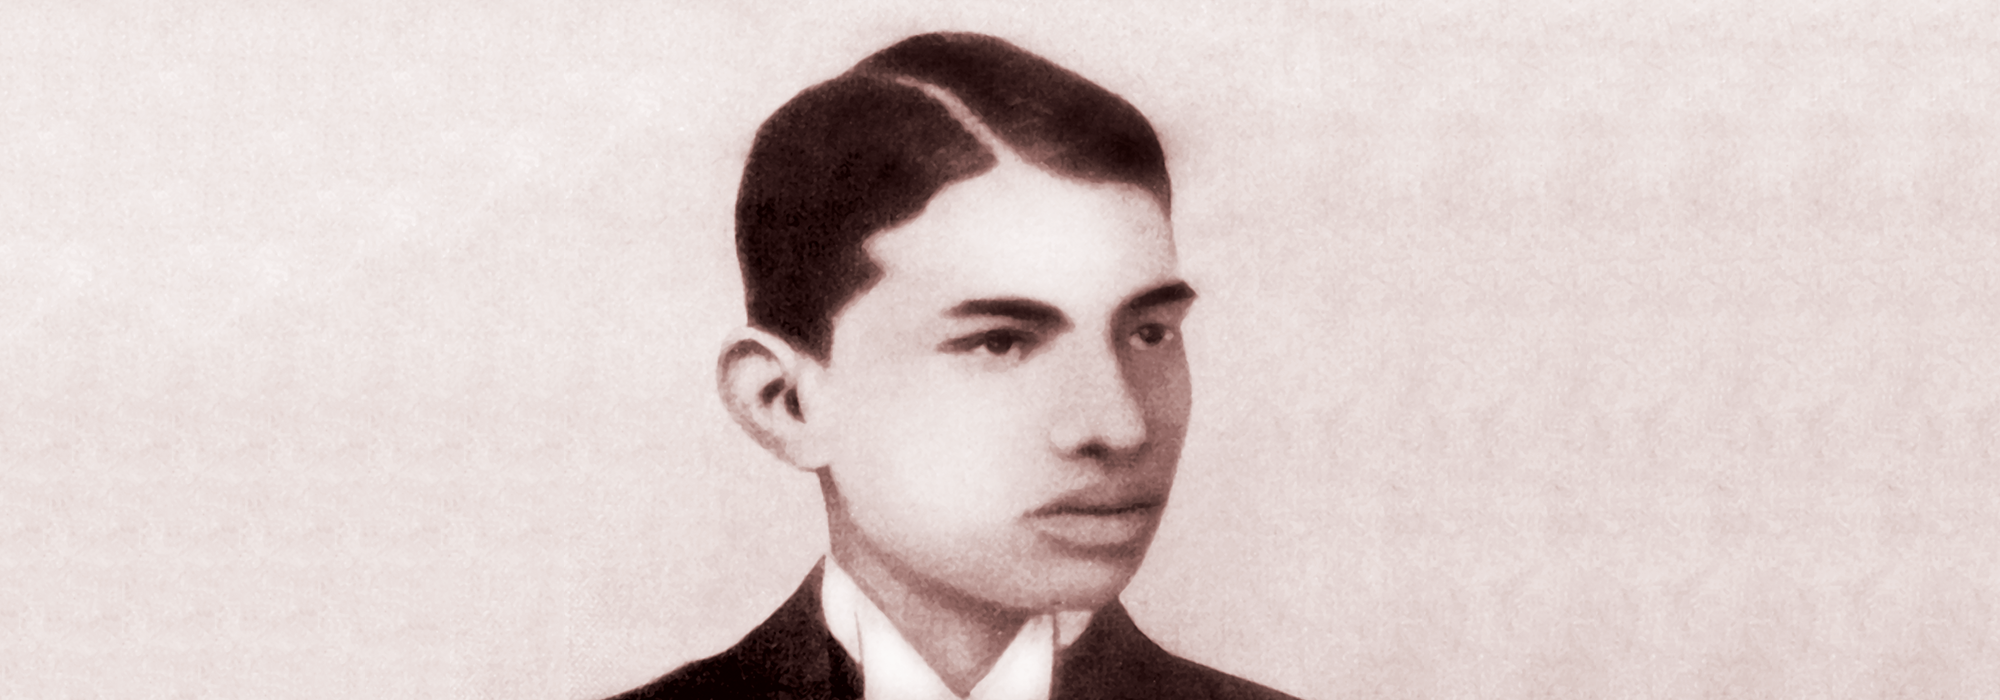 Gandhi at age 22 in UK as a law student